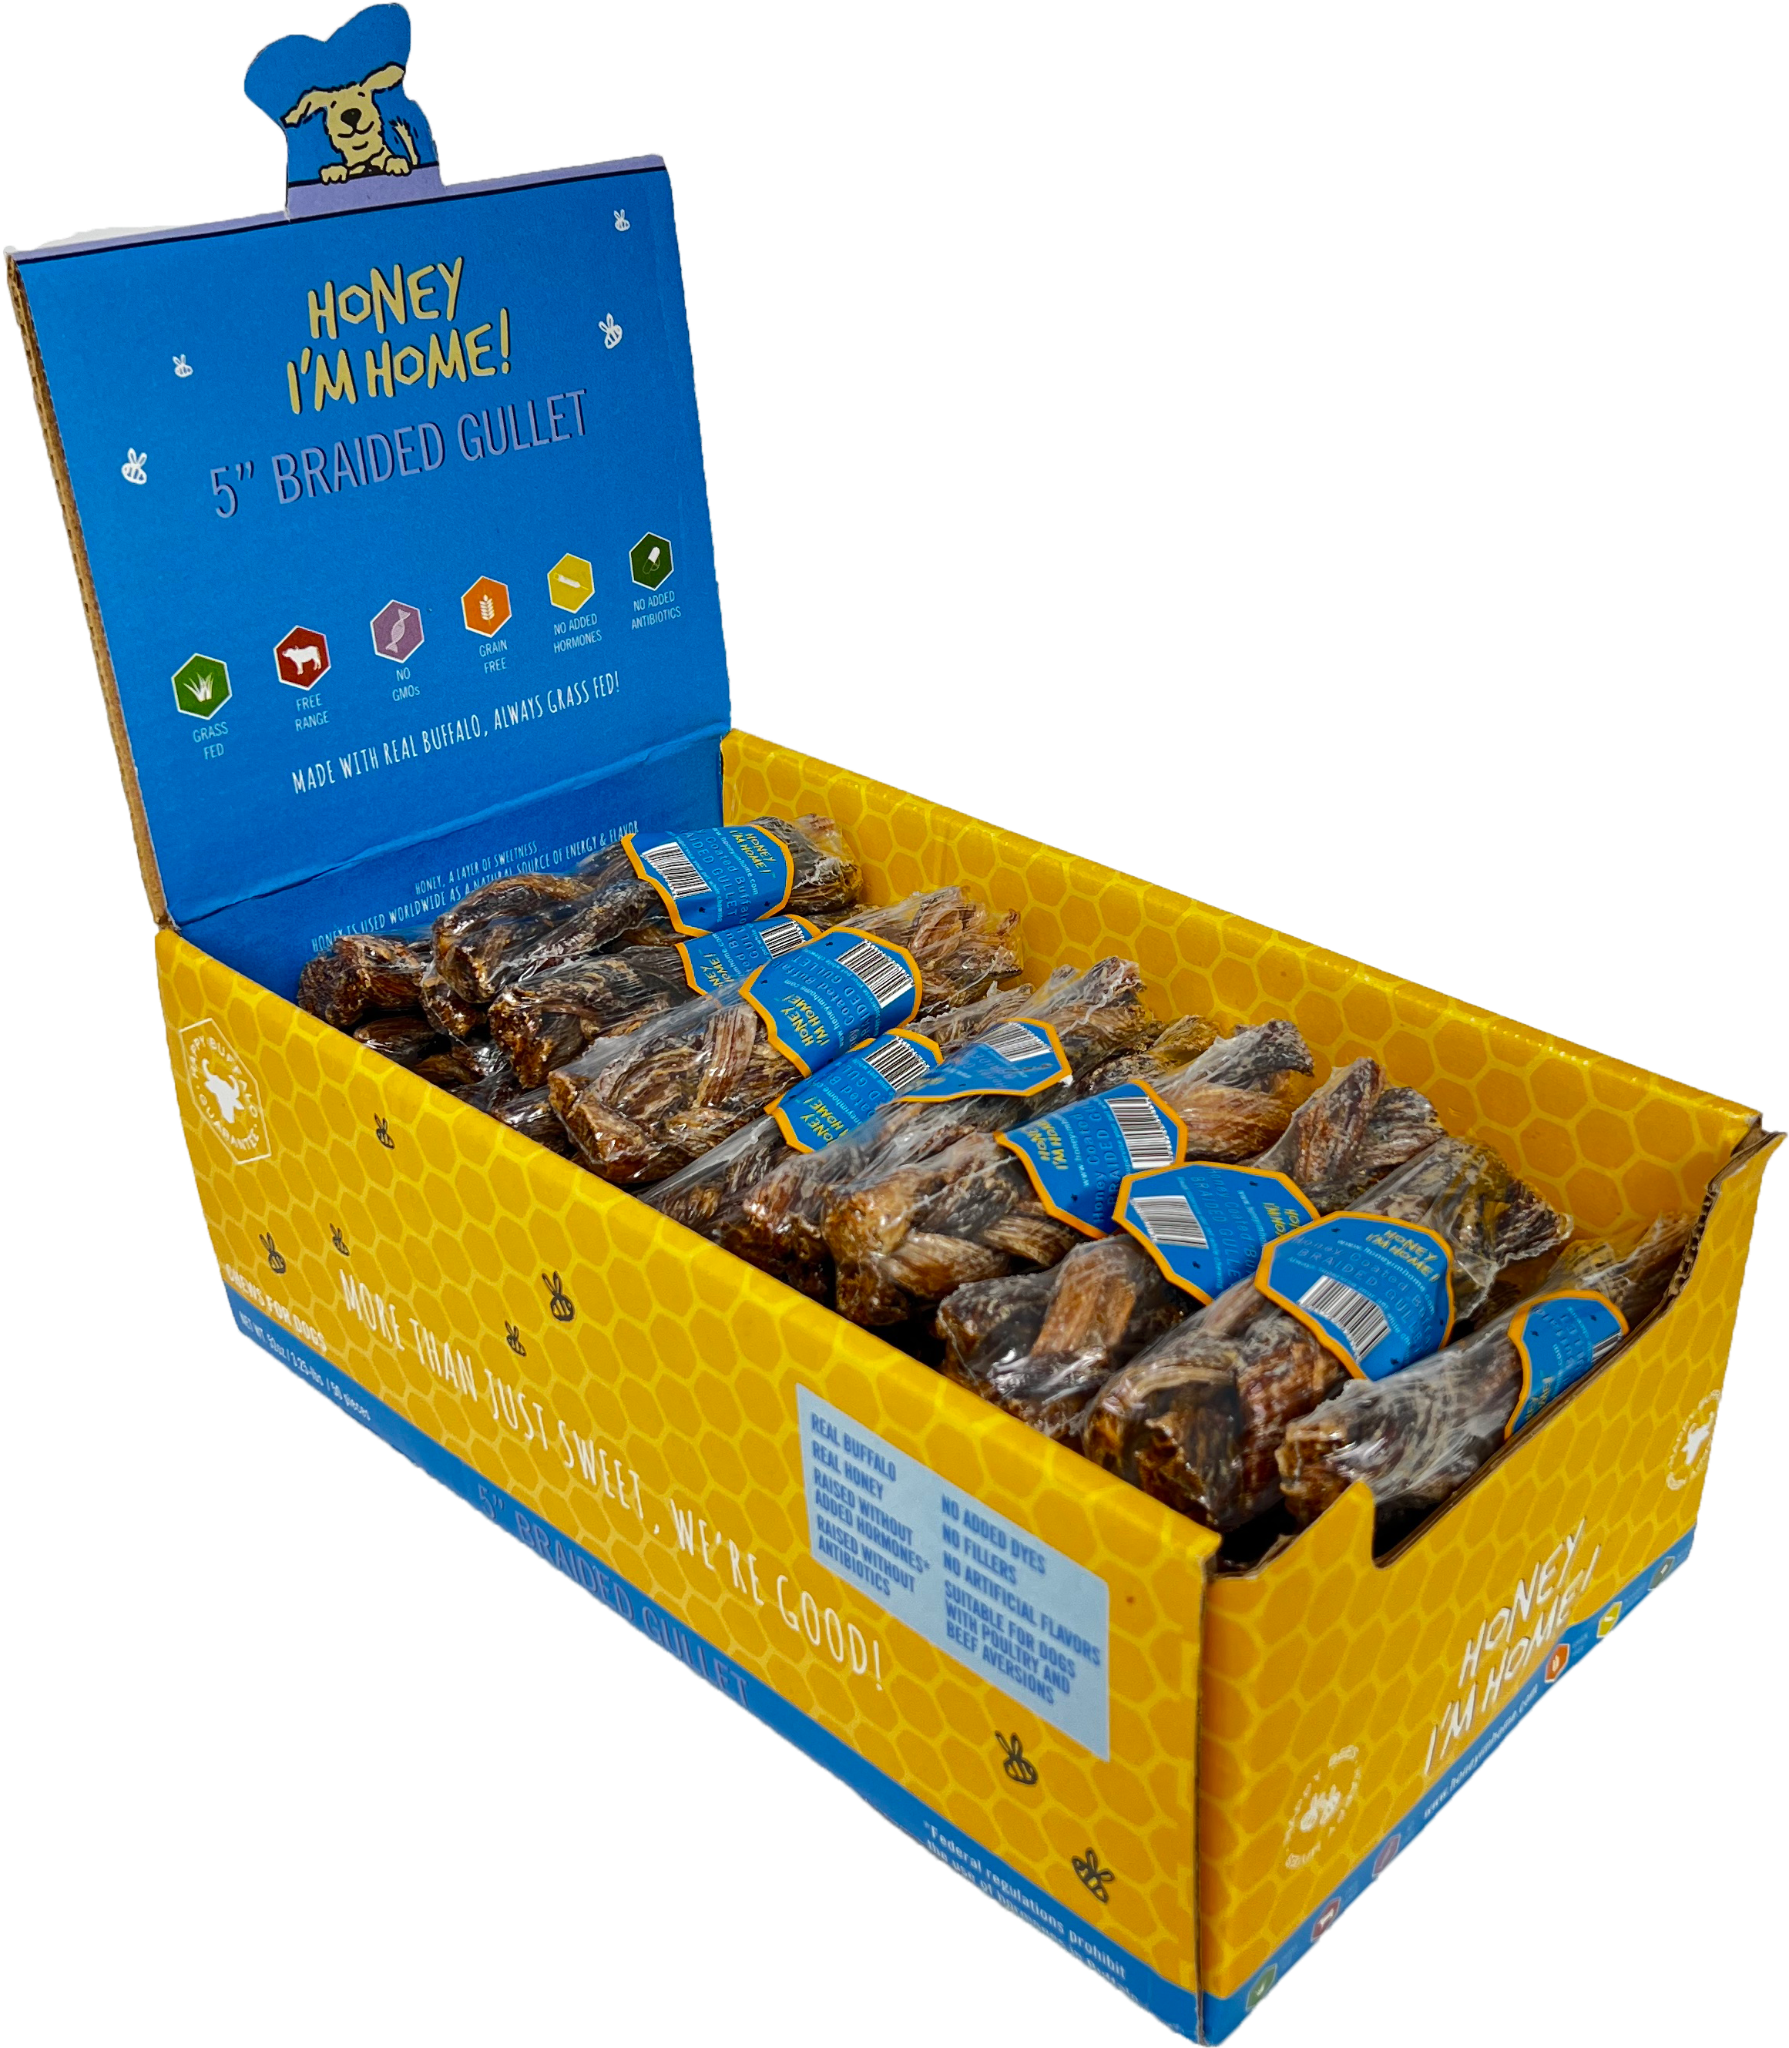 left side horizontal box, blue top, yellow bottom. filled with 50 pcs. braided gullet dog treats